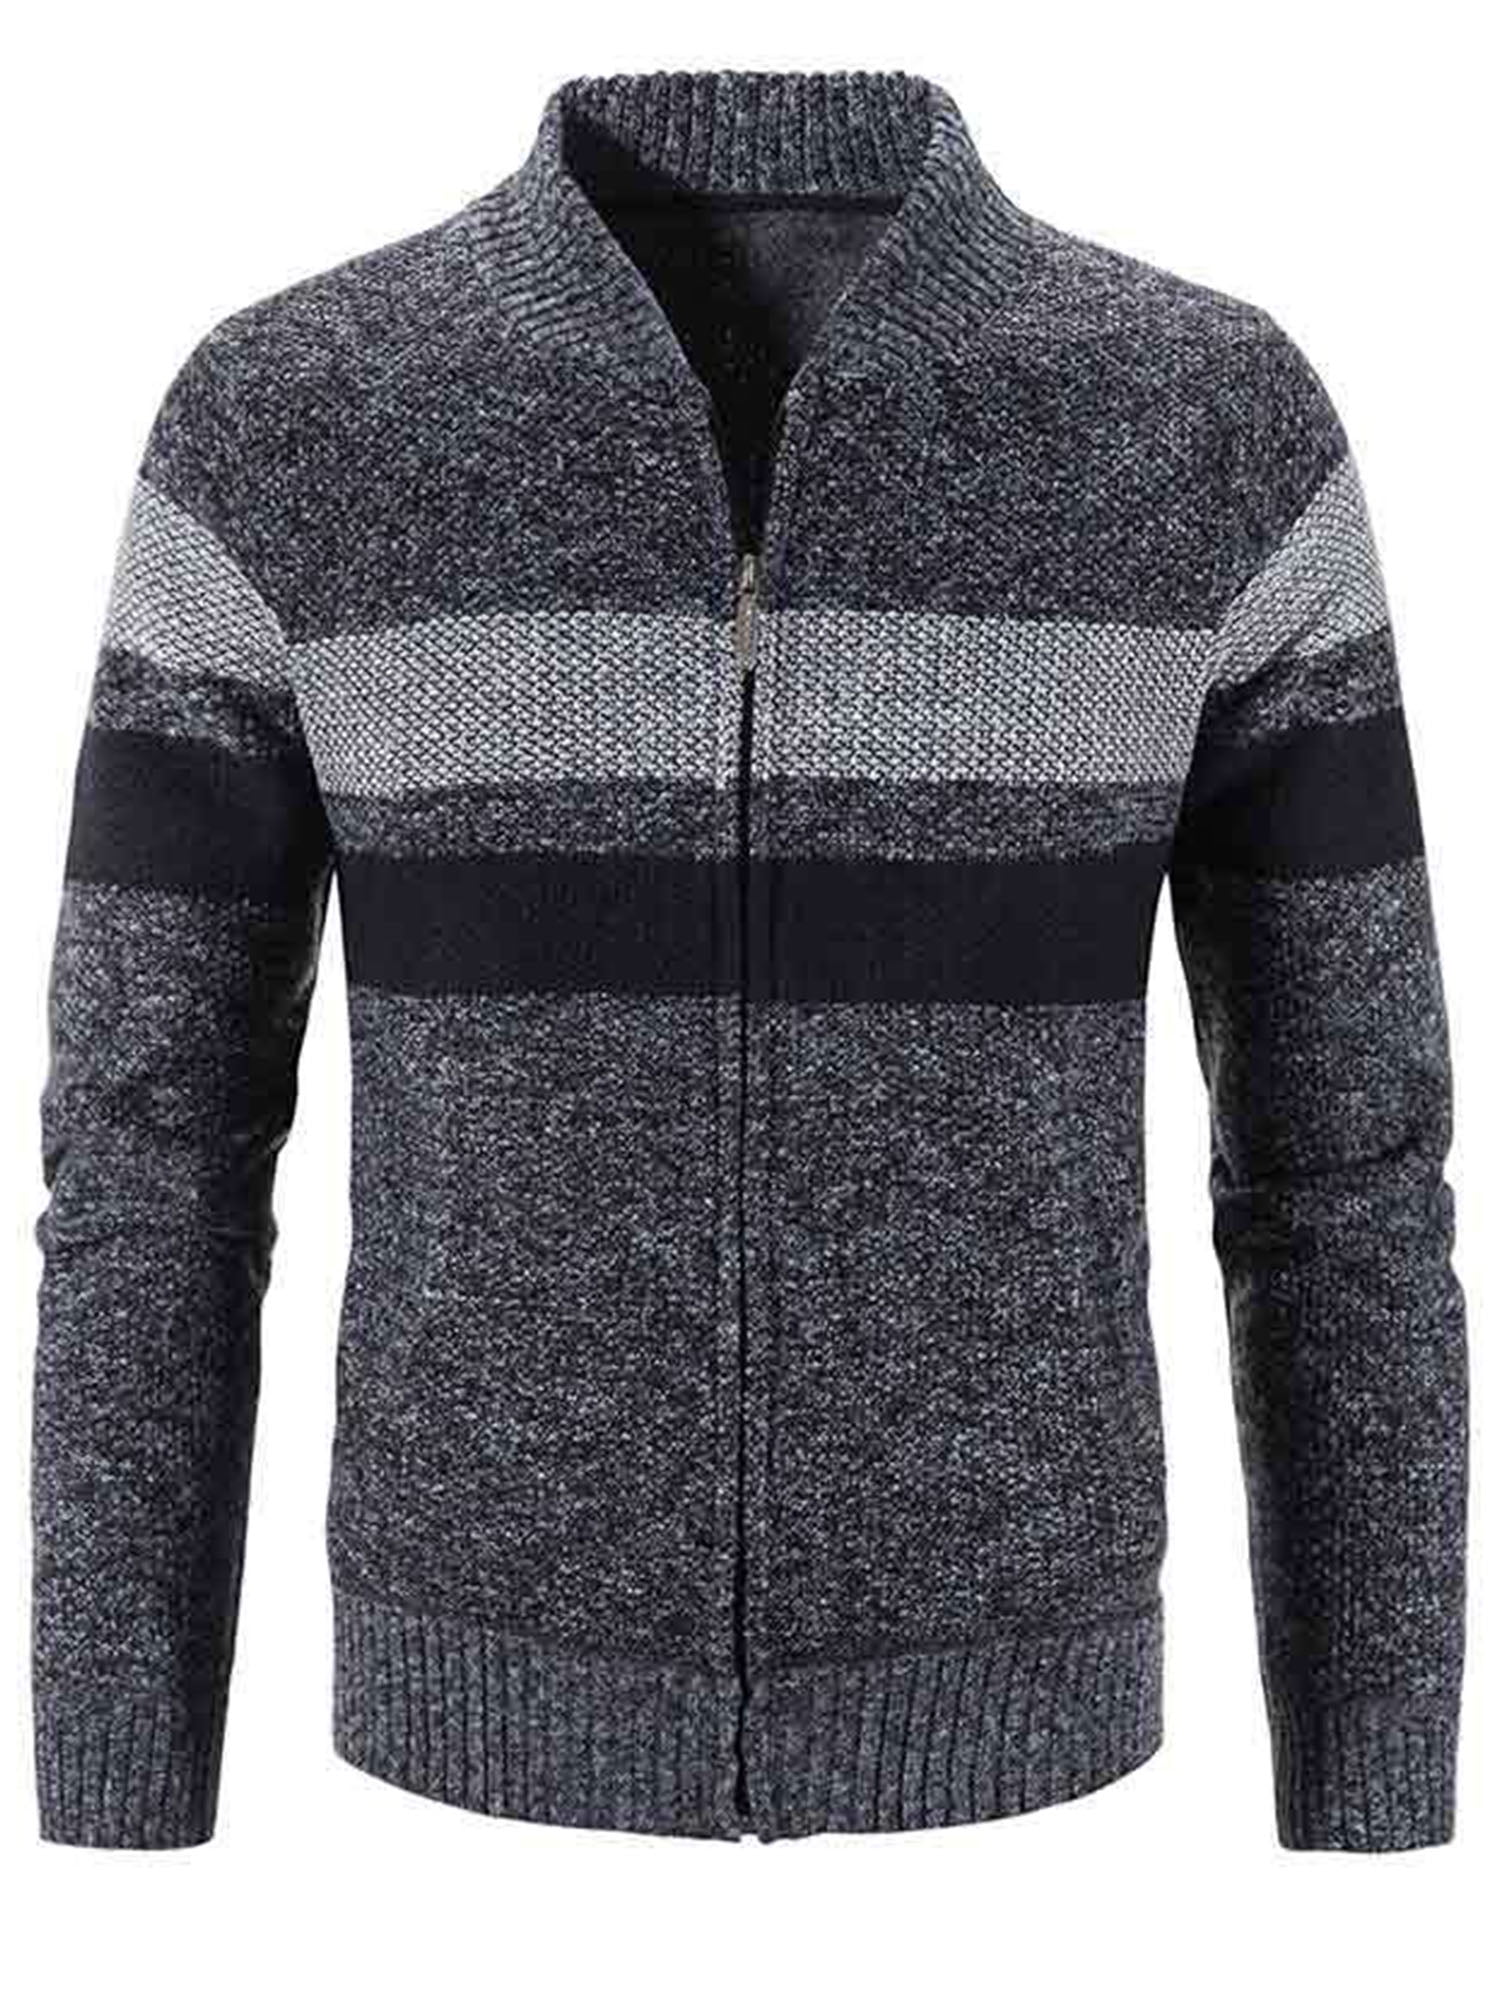 Frontwalk Mens Full Zip Cardigan Sweater with Pockets Slim Fit Contrast ...